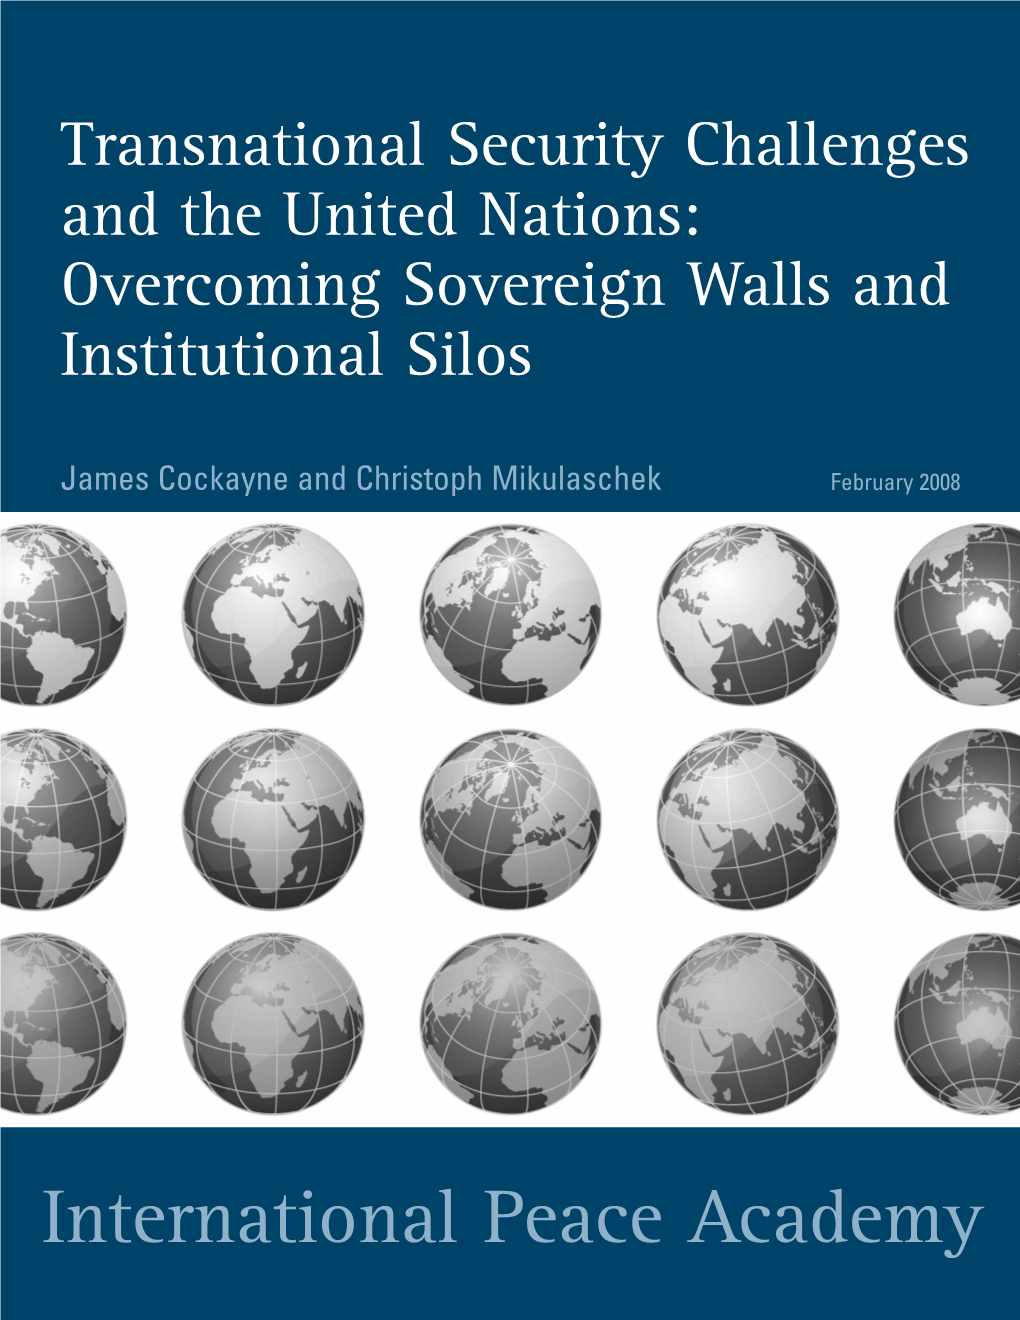 Transnational Security Challenges and the United Nations: Overcoming Sovereign Walls and Institutional Silos